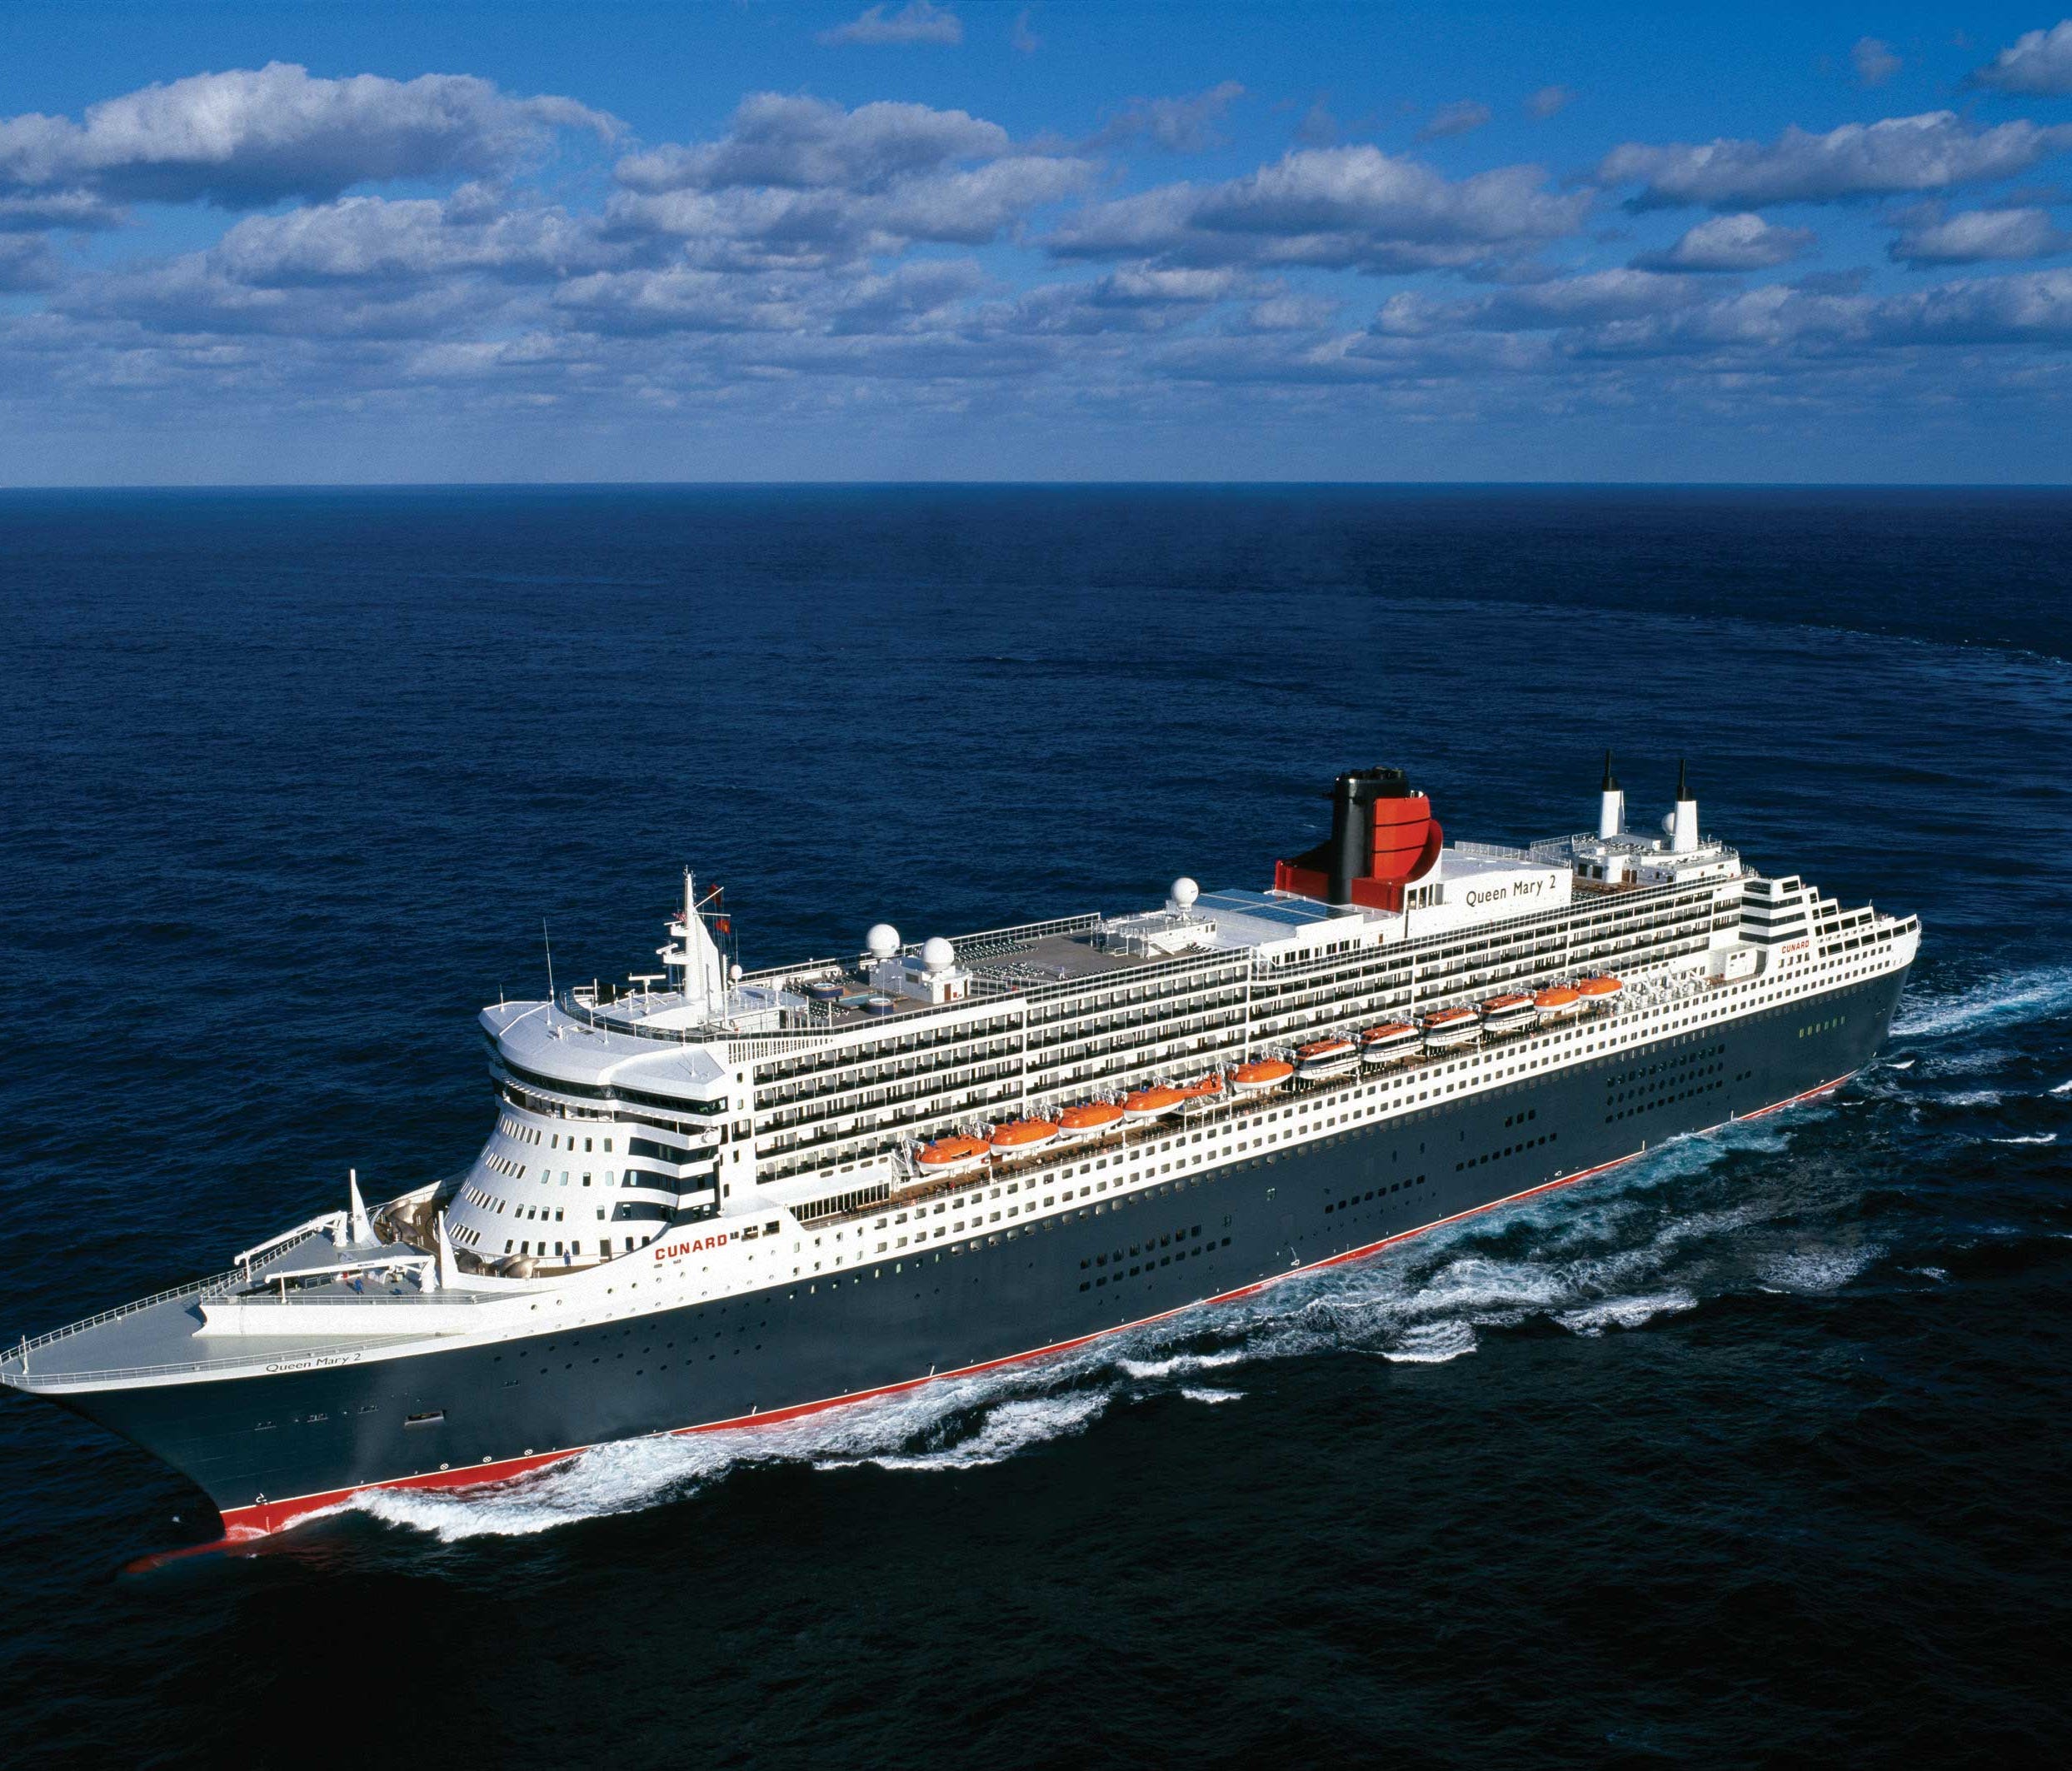 While still among the 20 biggest passenger vessels in the world, Queen Mary 2 retains a sleek and streamlined profile that would have been more common half a century ago.